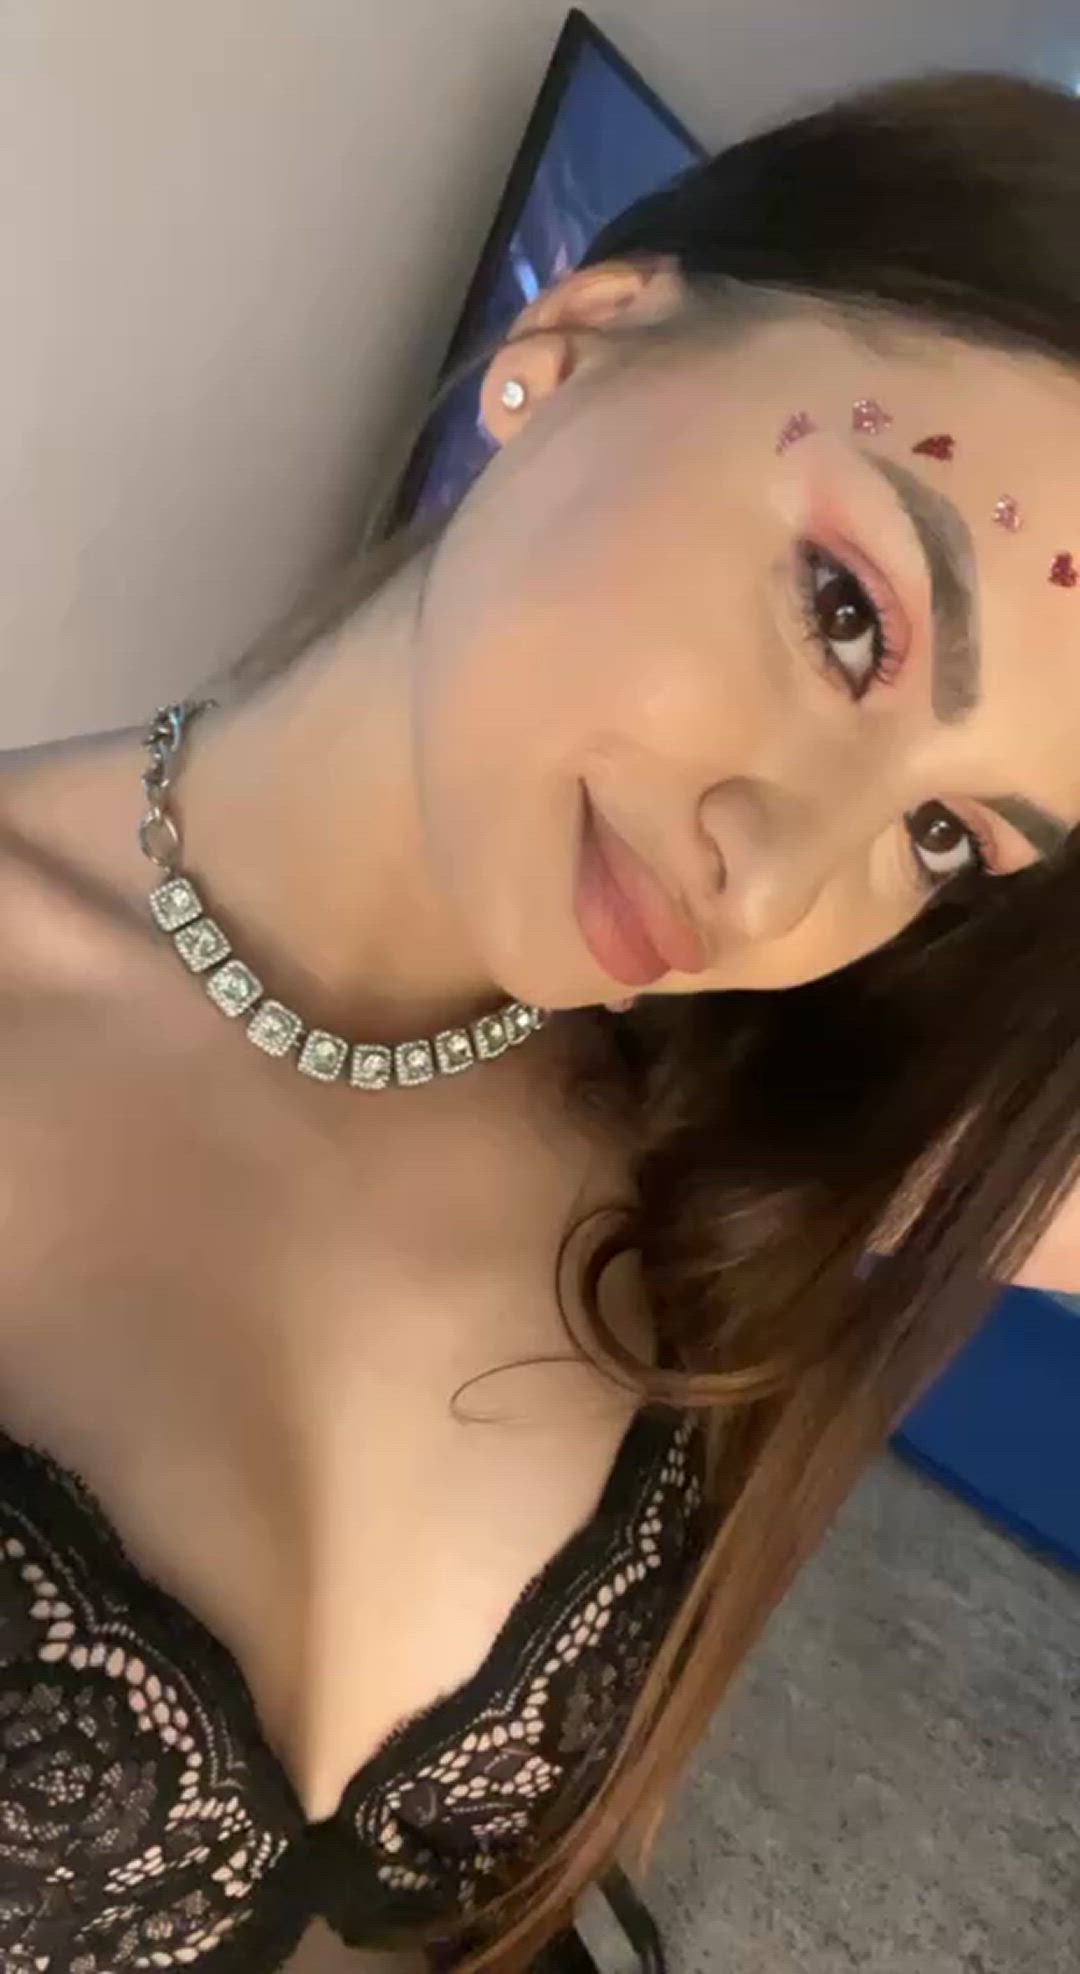 Amateur porn video with onlyfans model Clara💜🙈 <strong>@claraquinn</strong>